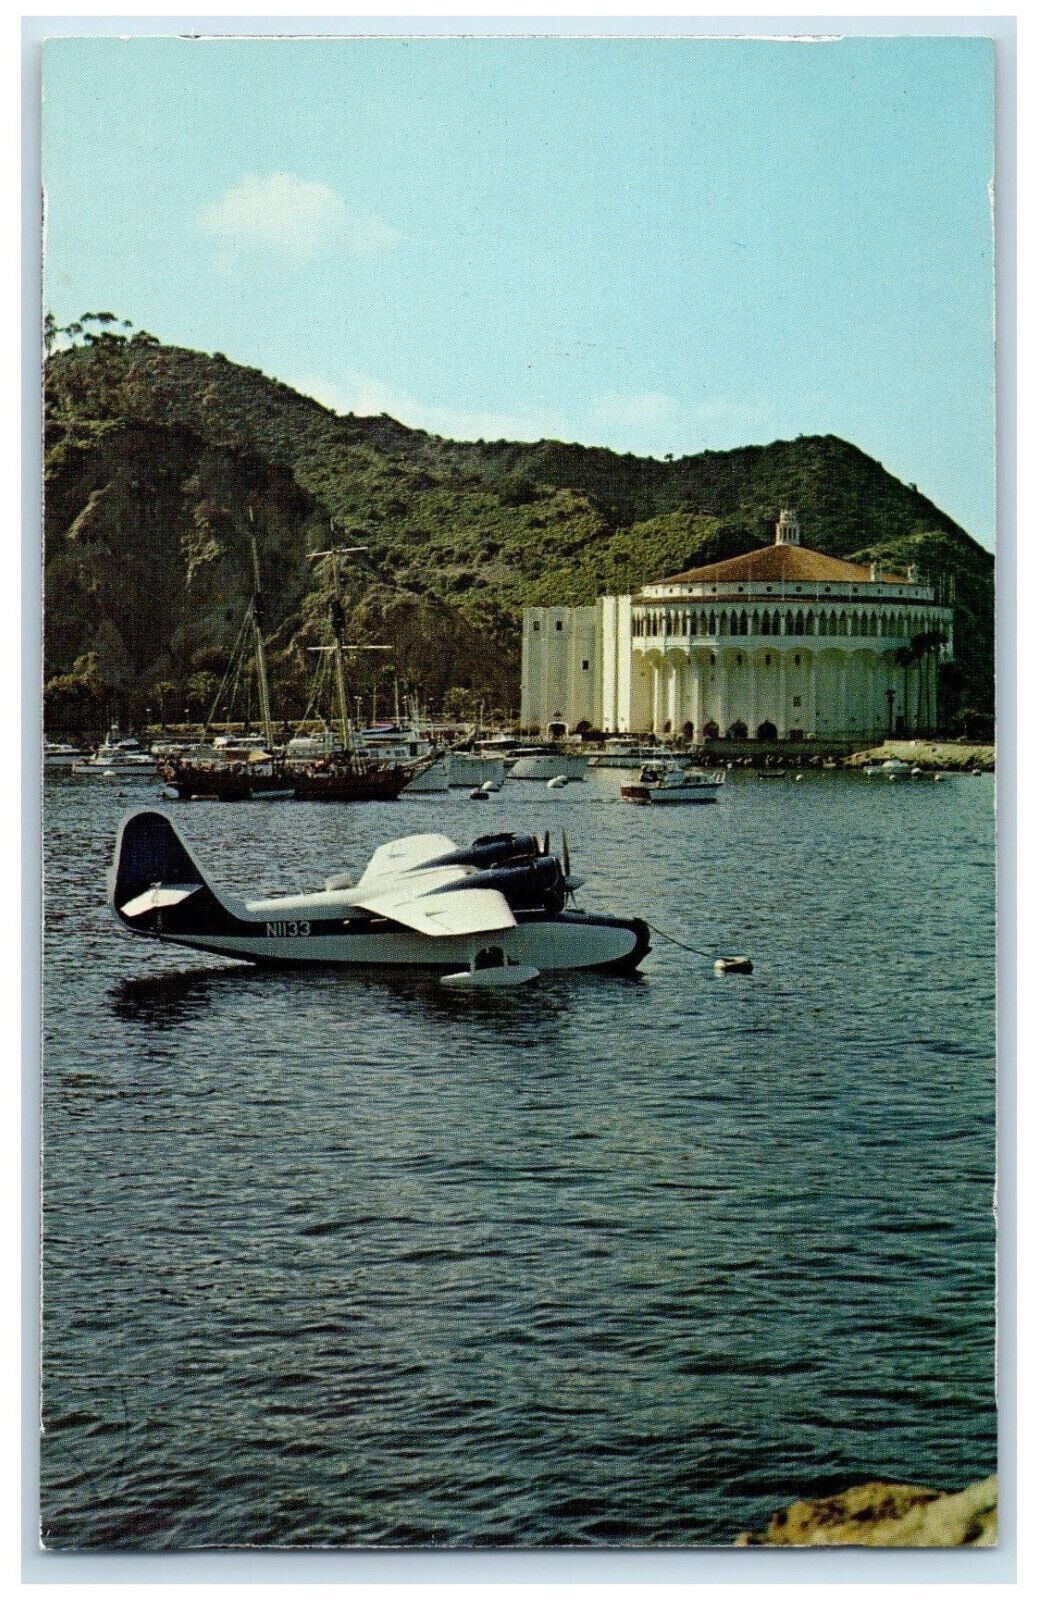 c1960s N1133 Airplane, Greetings from Catalina California Avalon Bay Postcard